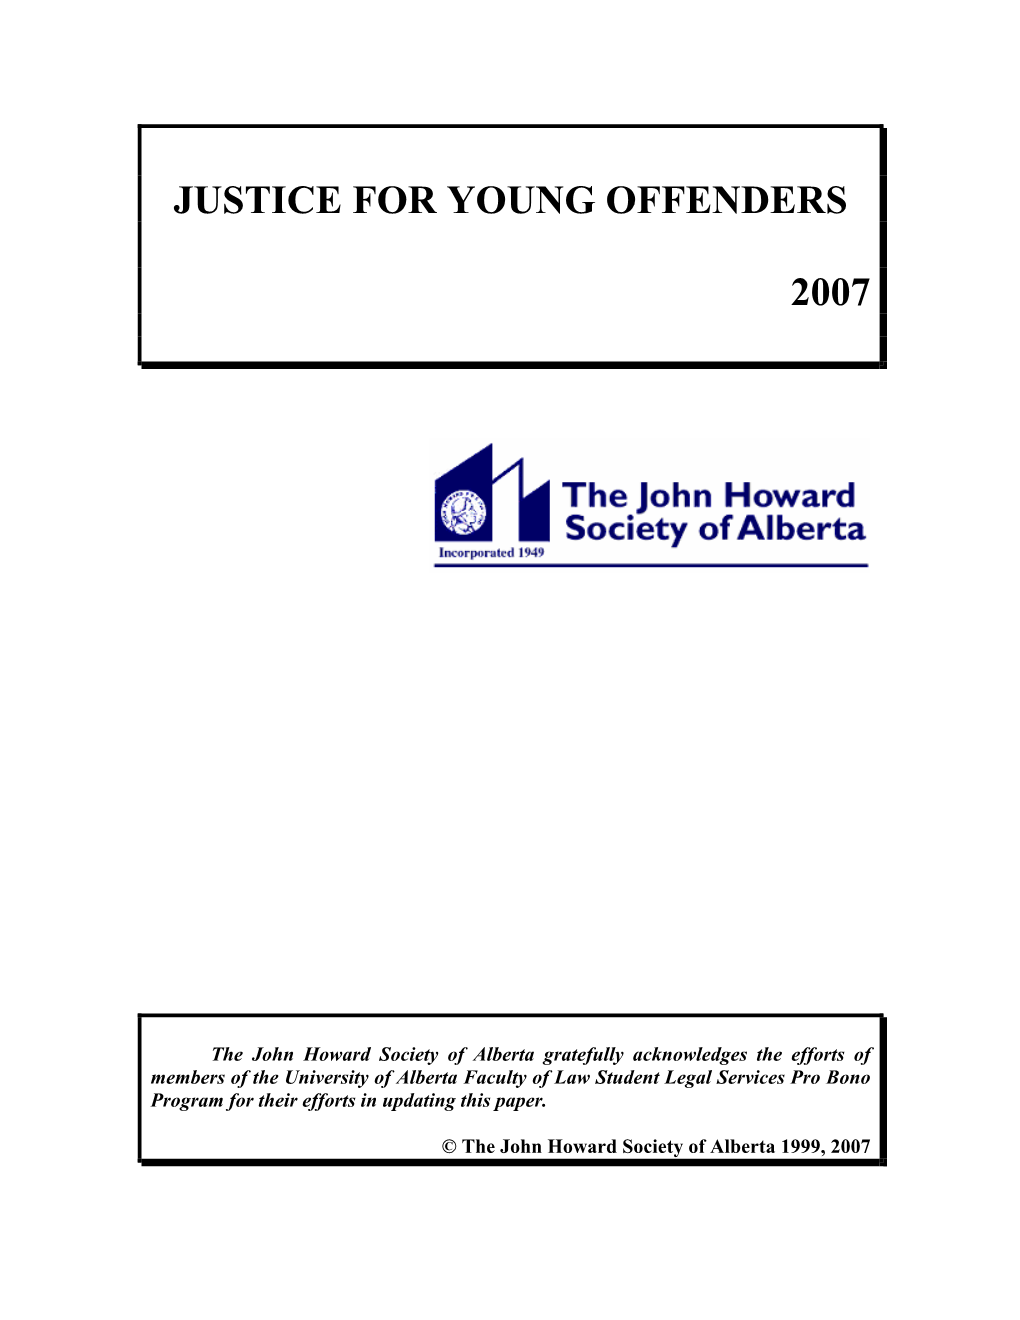 Justice for Young Offenders